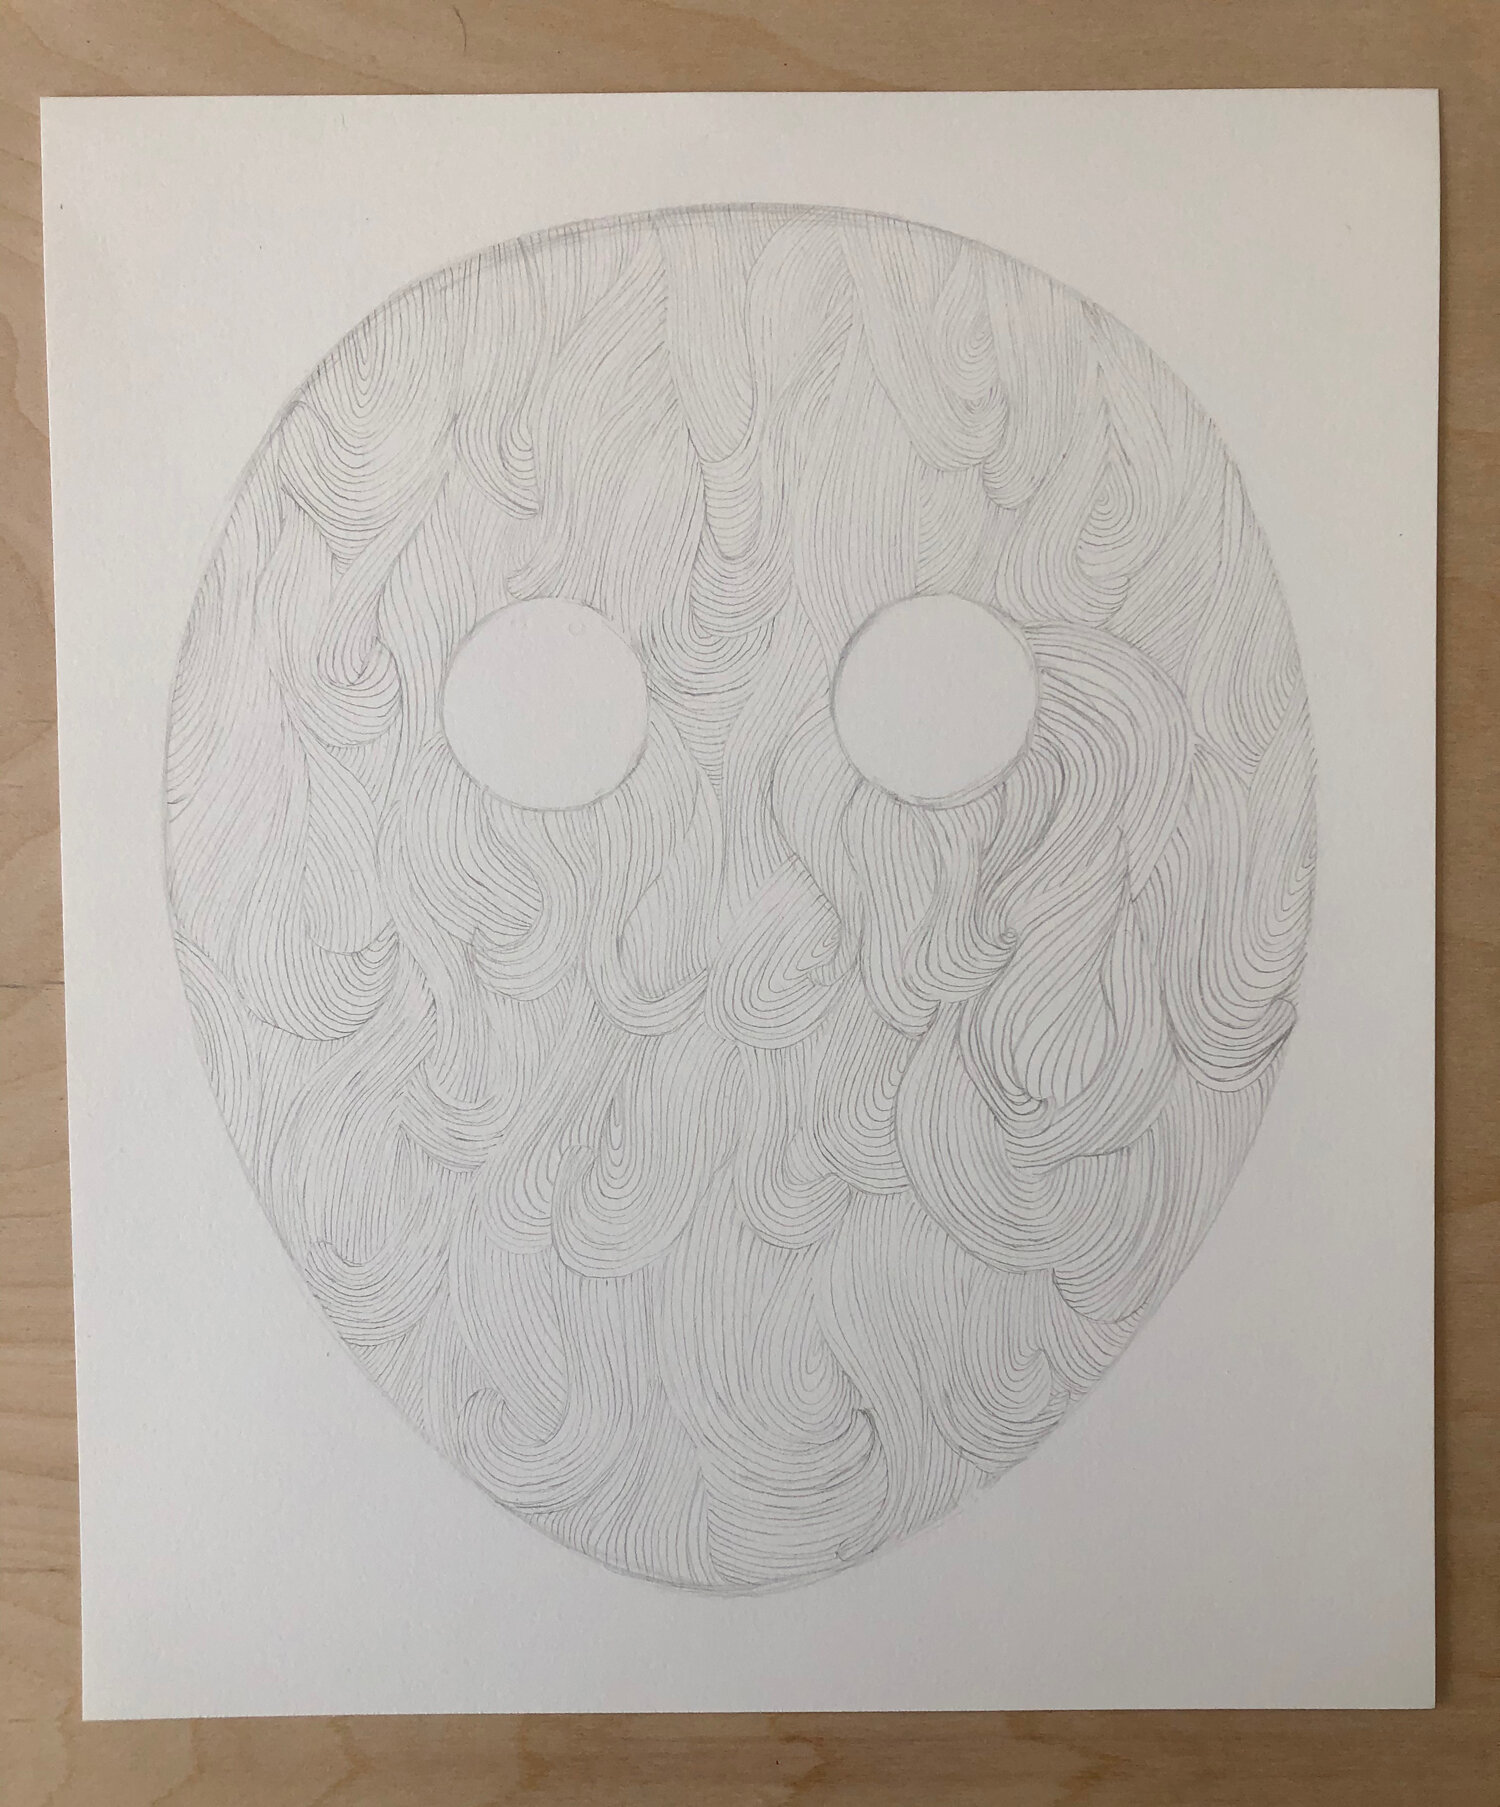 Mask, 2020, pencil on paper, 13 x 11"